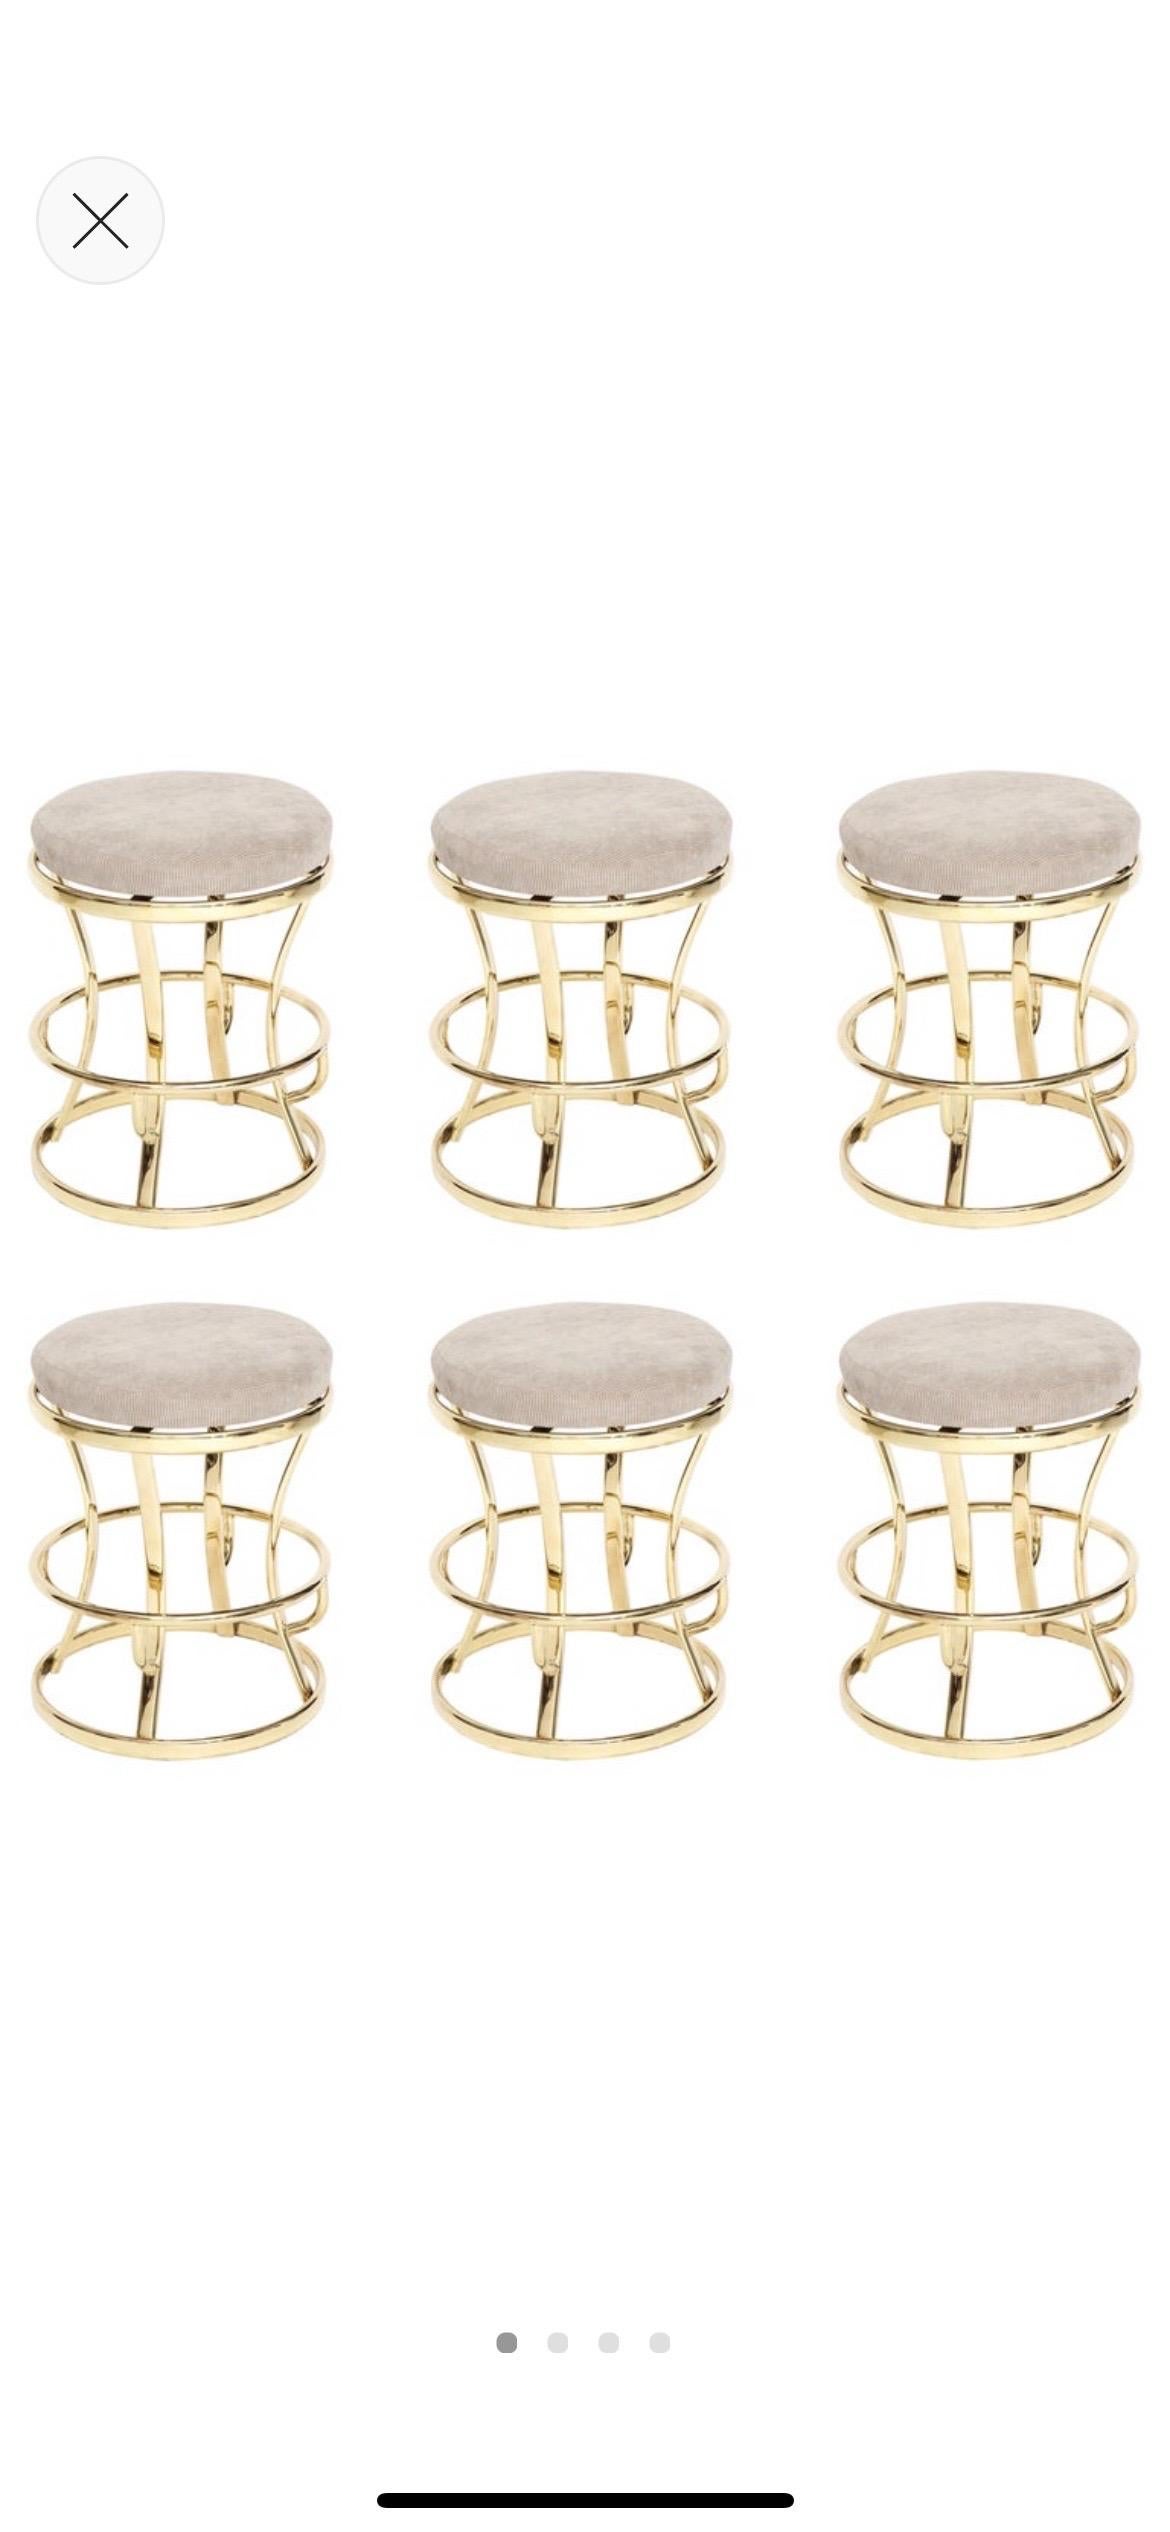 Four Glamorous Brass and Grey Barstools, Midcentury, France, 1970s For Sale 1